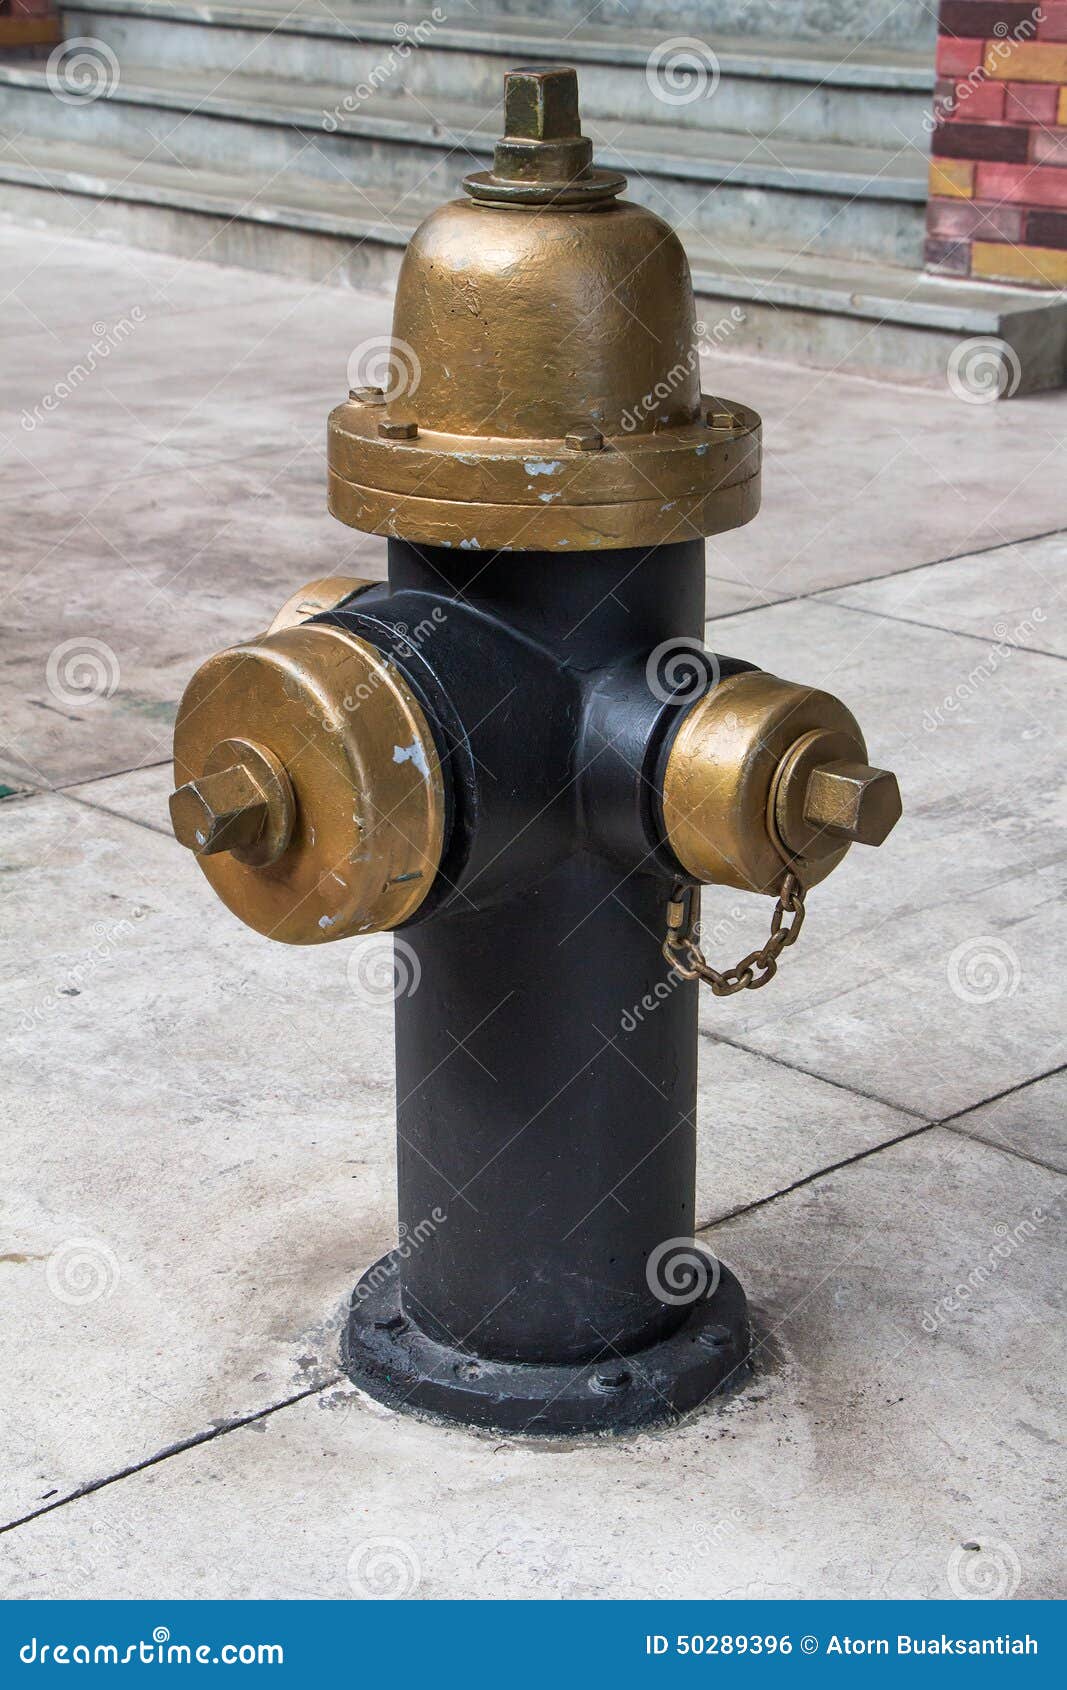 fire hydrant vintage style in newyork